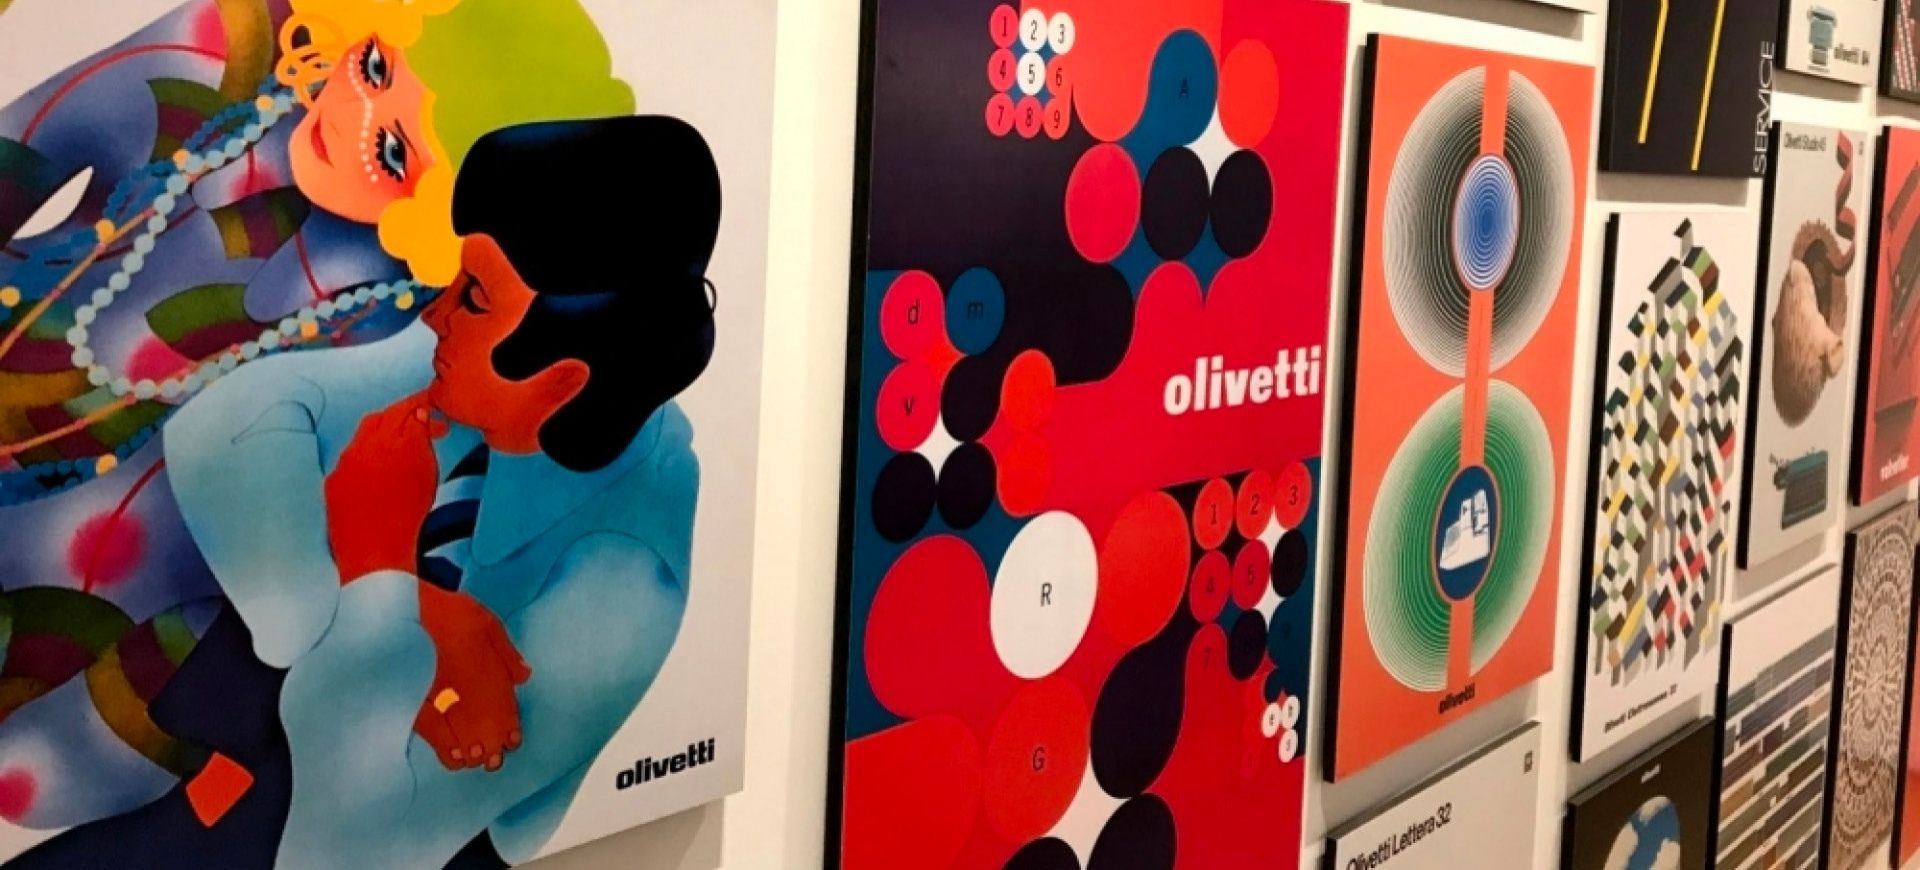 Olivetti and Its Posters